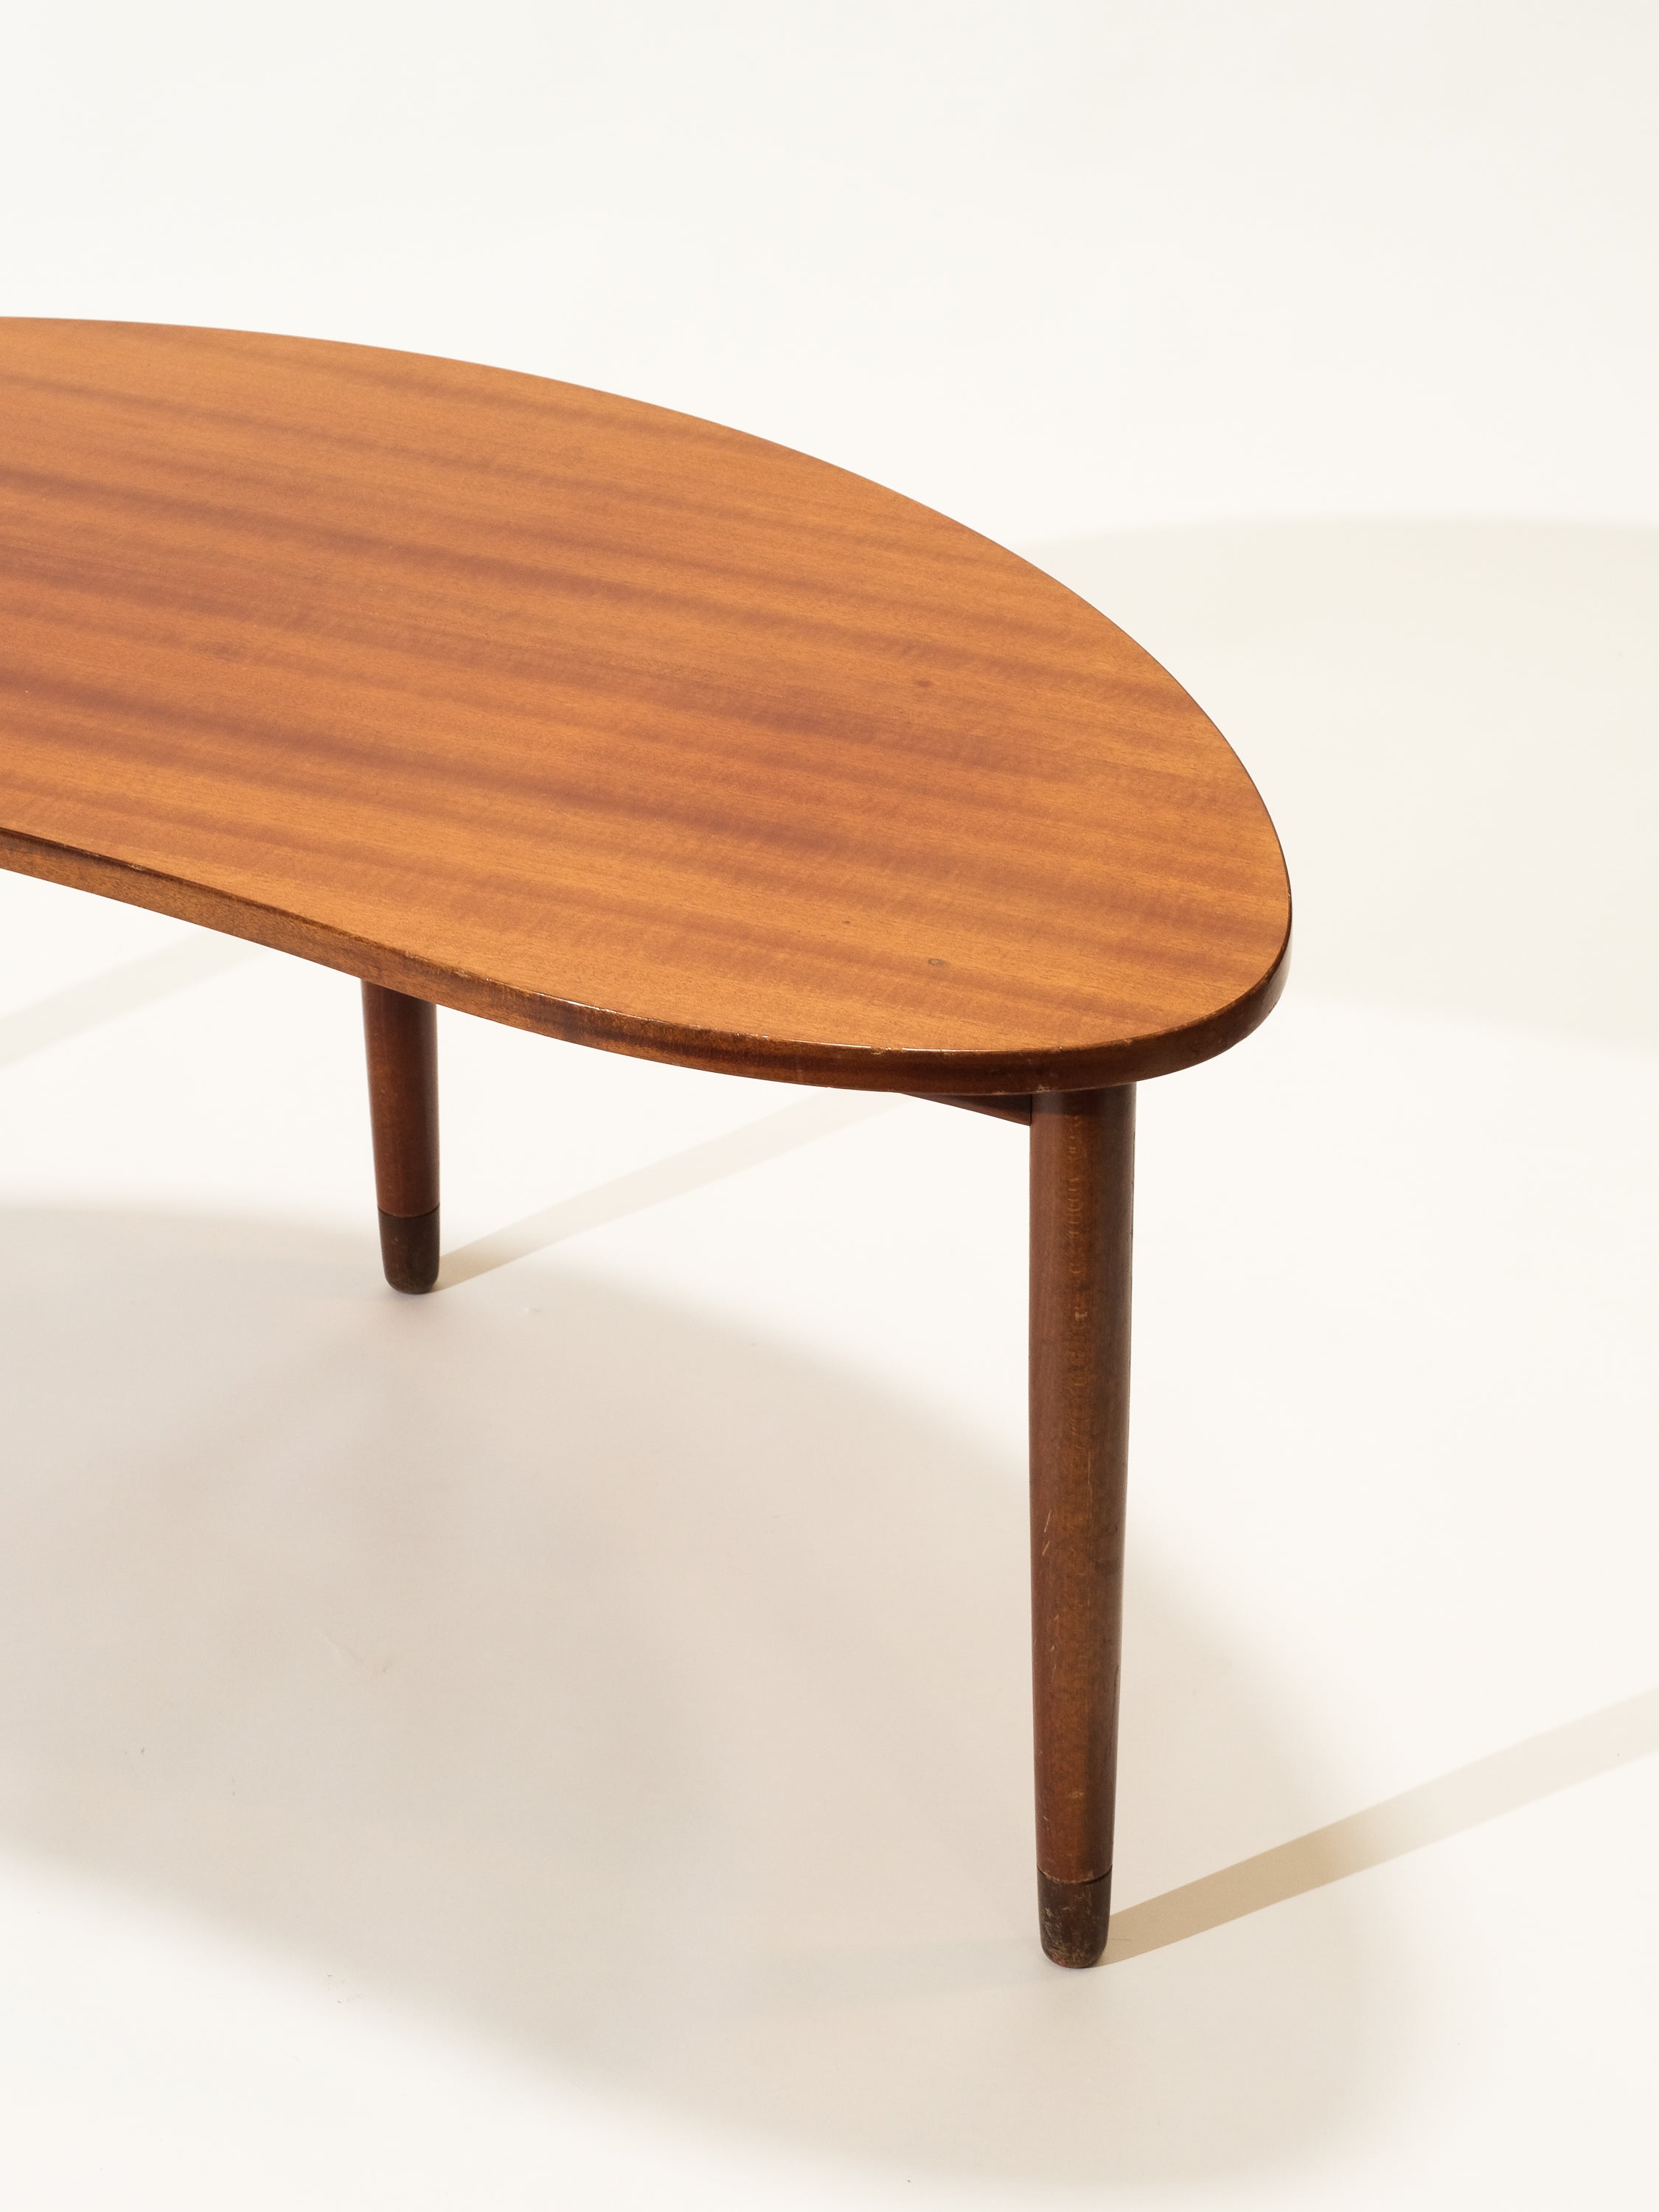 Kidney Shaped Coffee Table in Mahogany